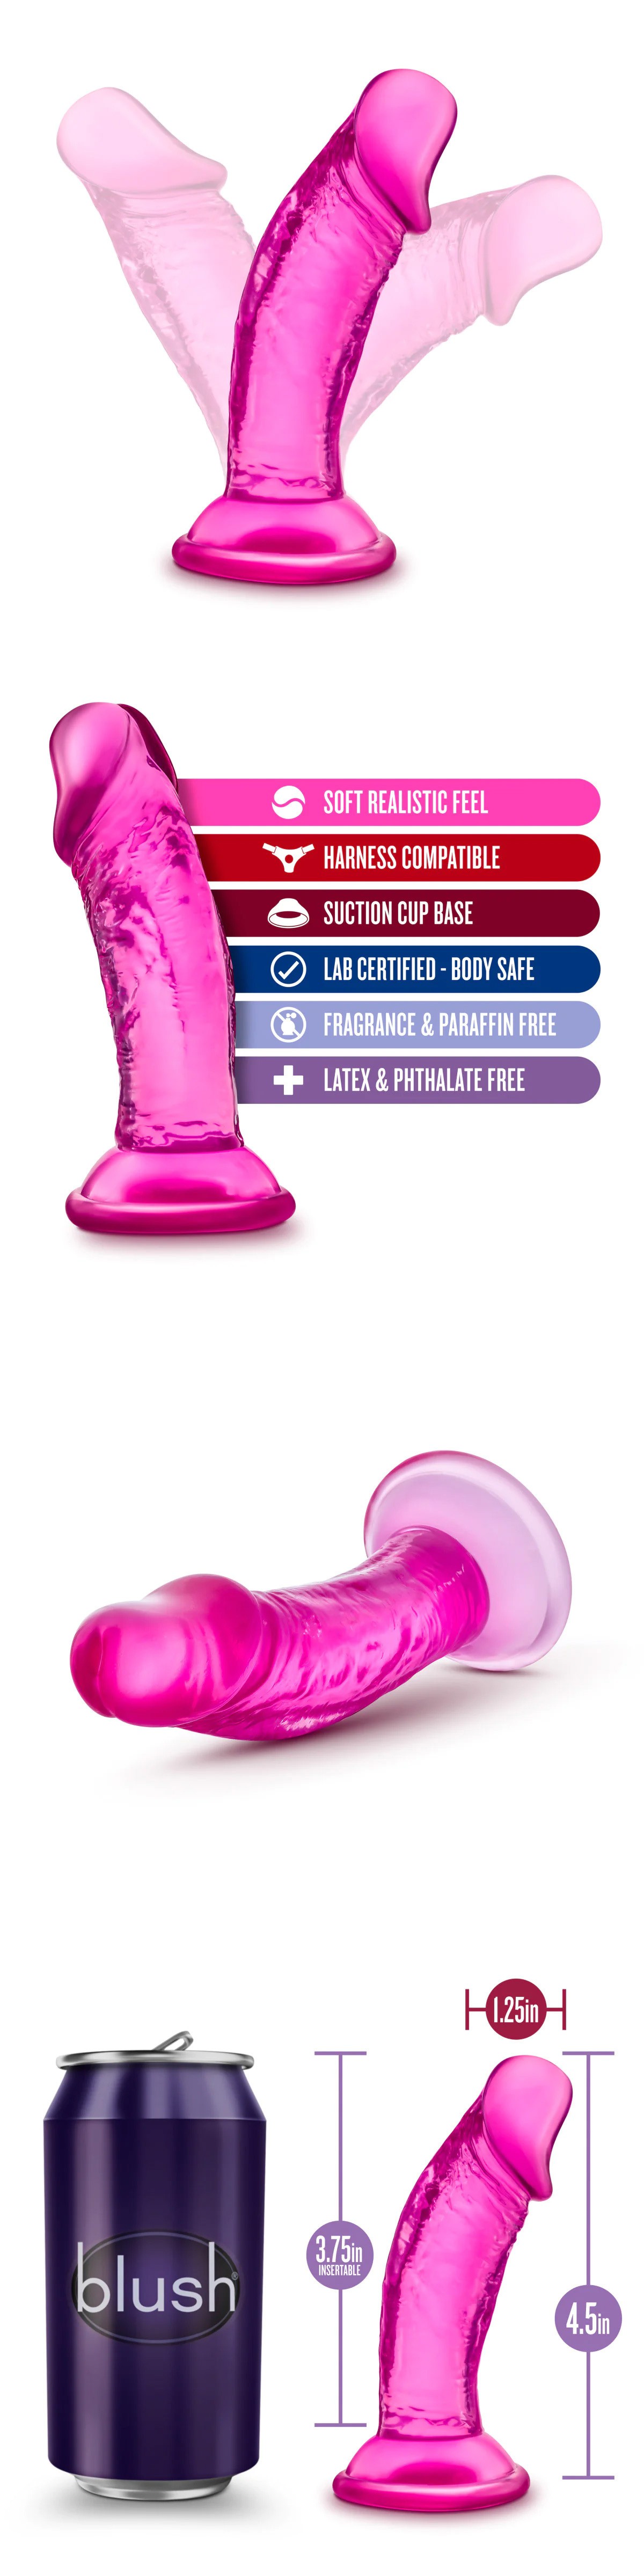 Blush B Yours Sweet N' Small Realistic Pink 4.5 Inch Dildo